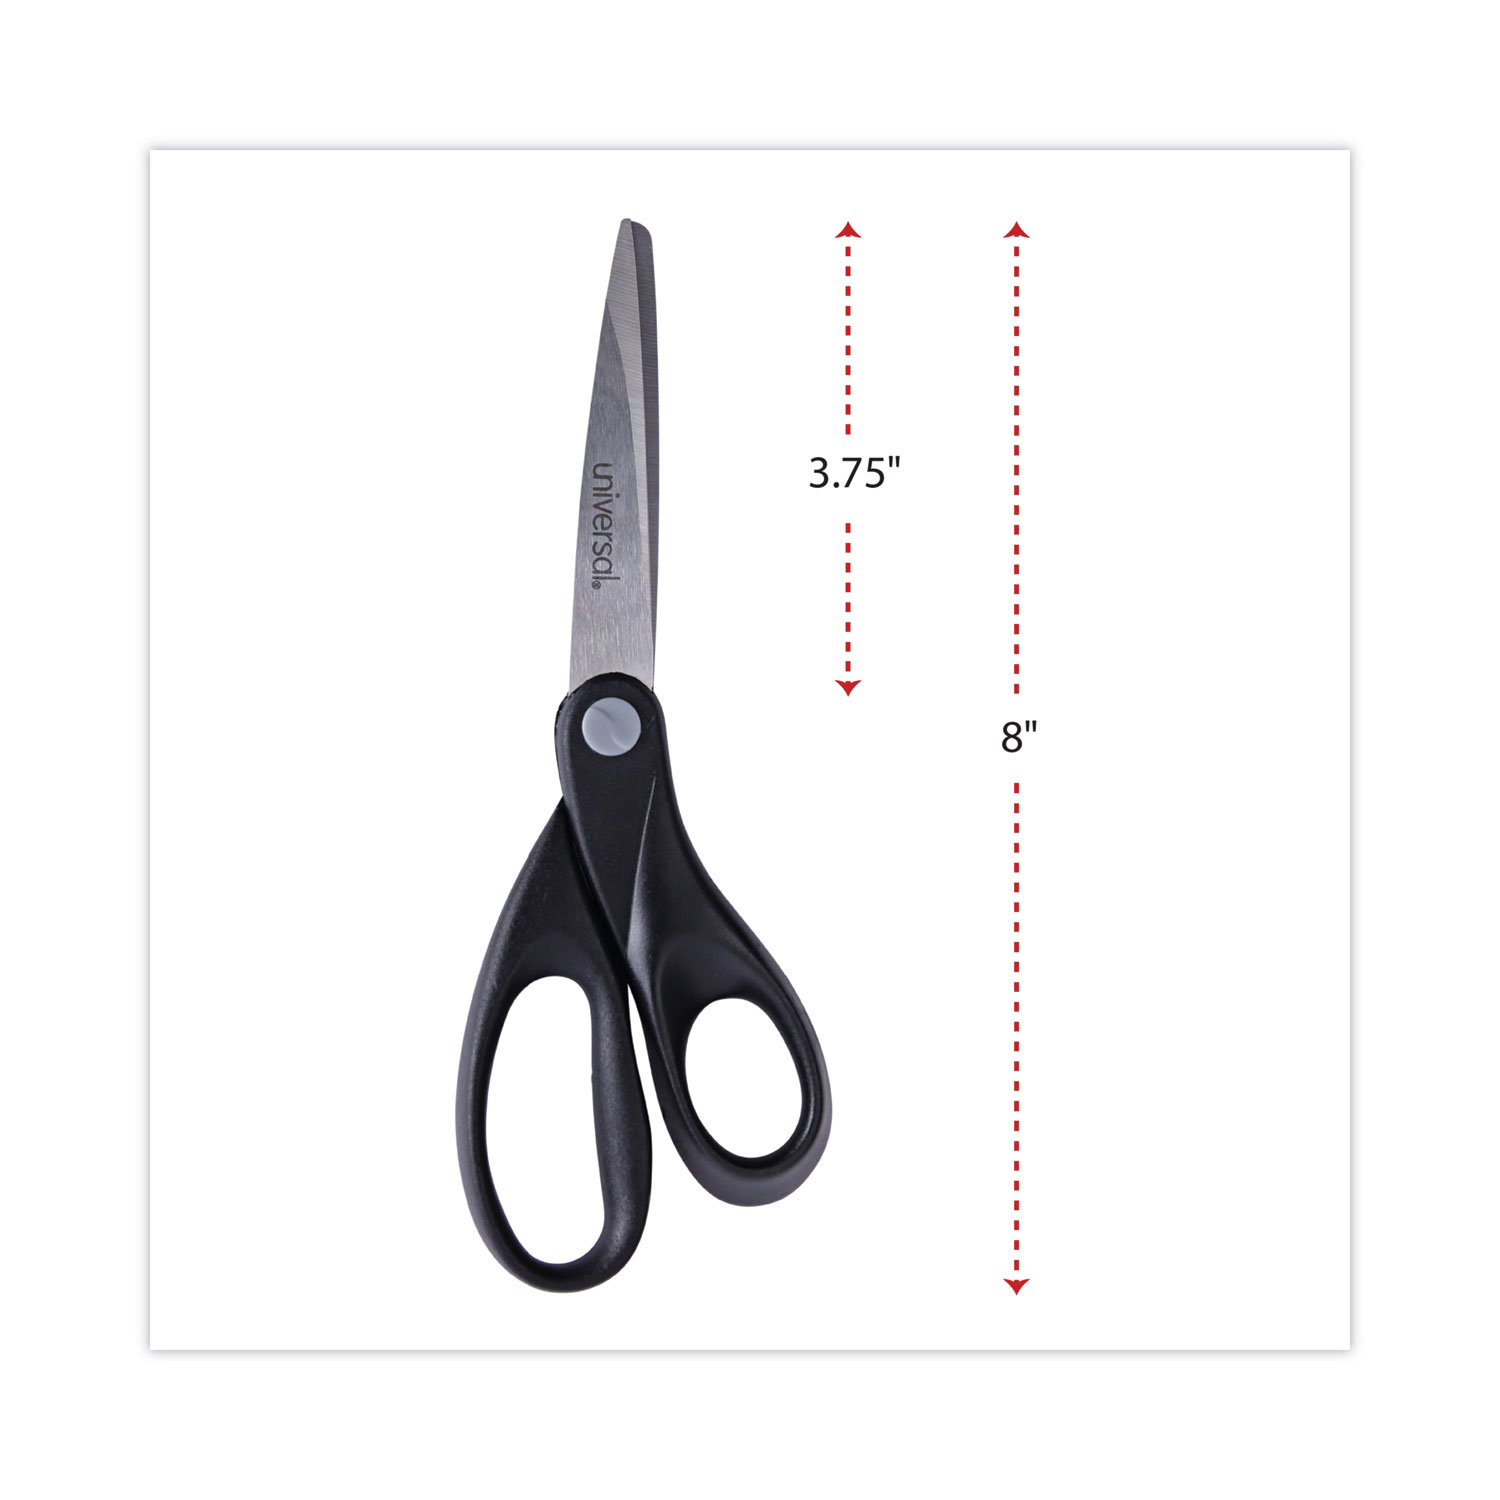 Stainless Steel Office Scissors, Pointed Tip, 7 Long, 3 Cut Length, Black  Straight Handle - Zerbee